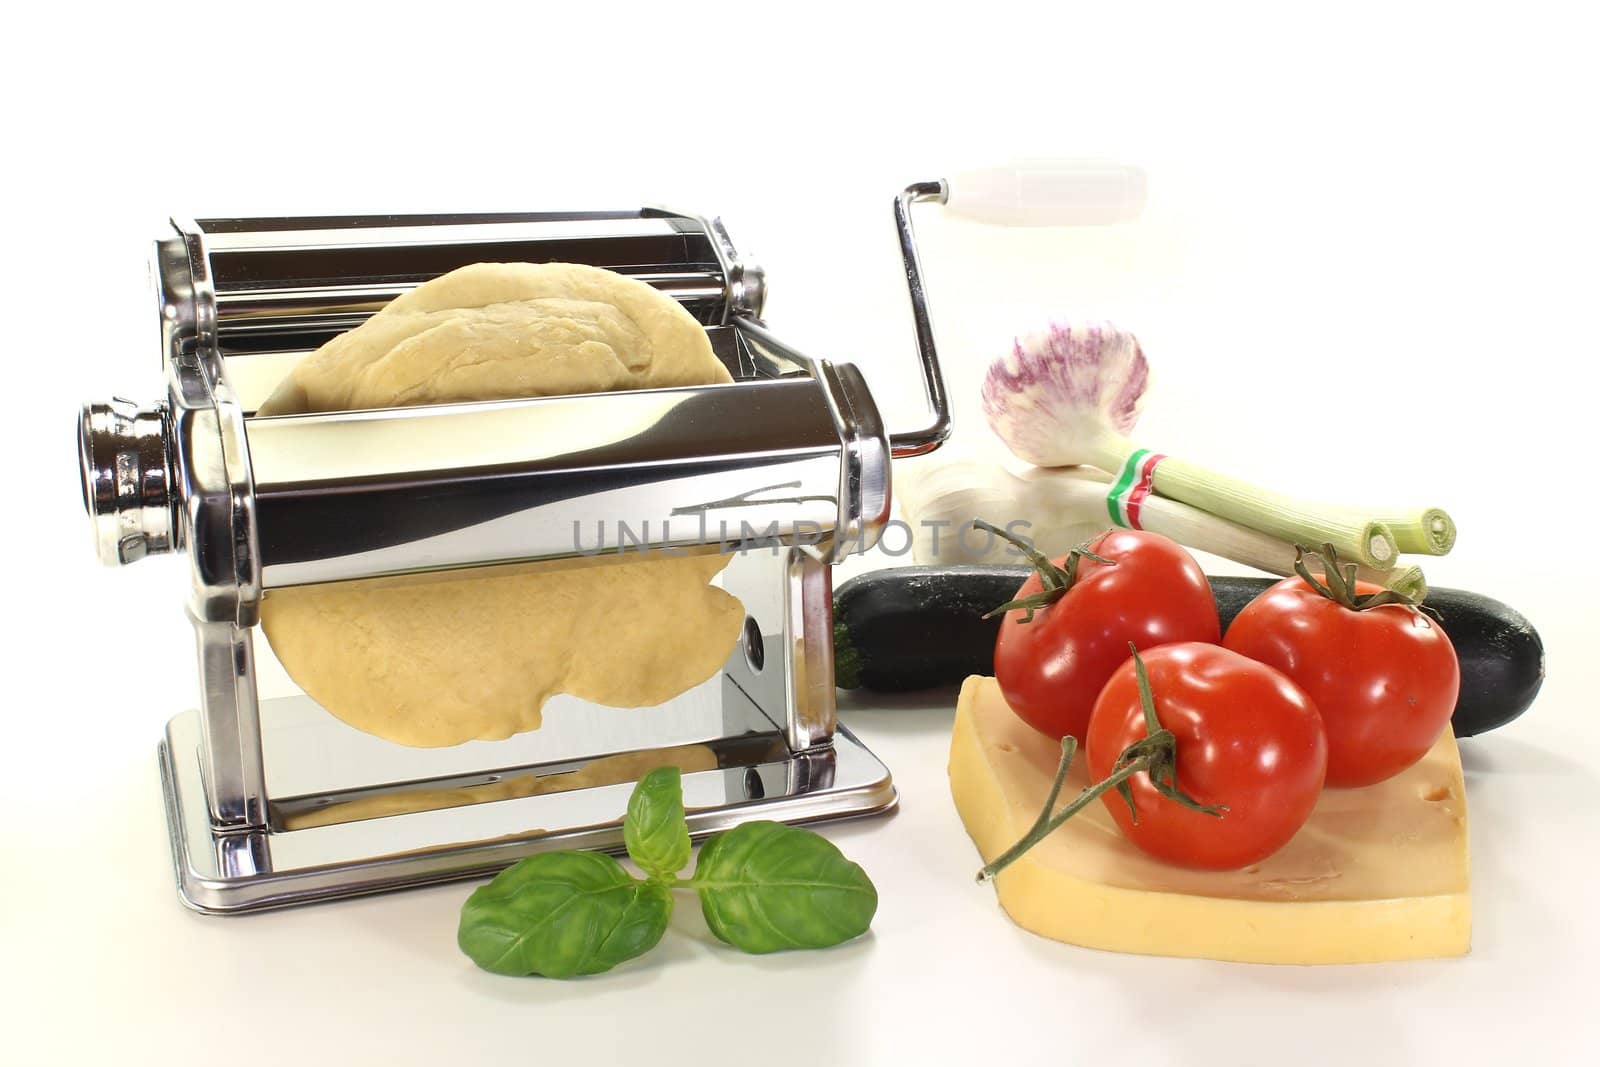 Noodle dough with a pasta machine and tomatoes by discovery